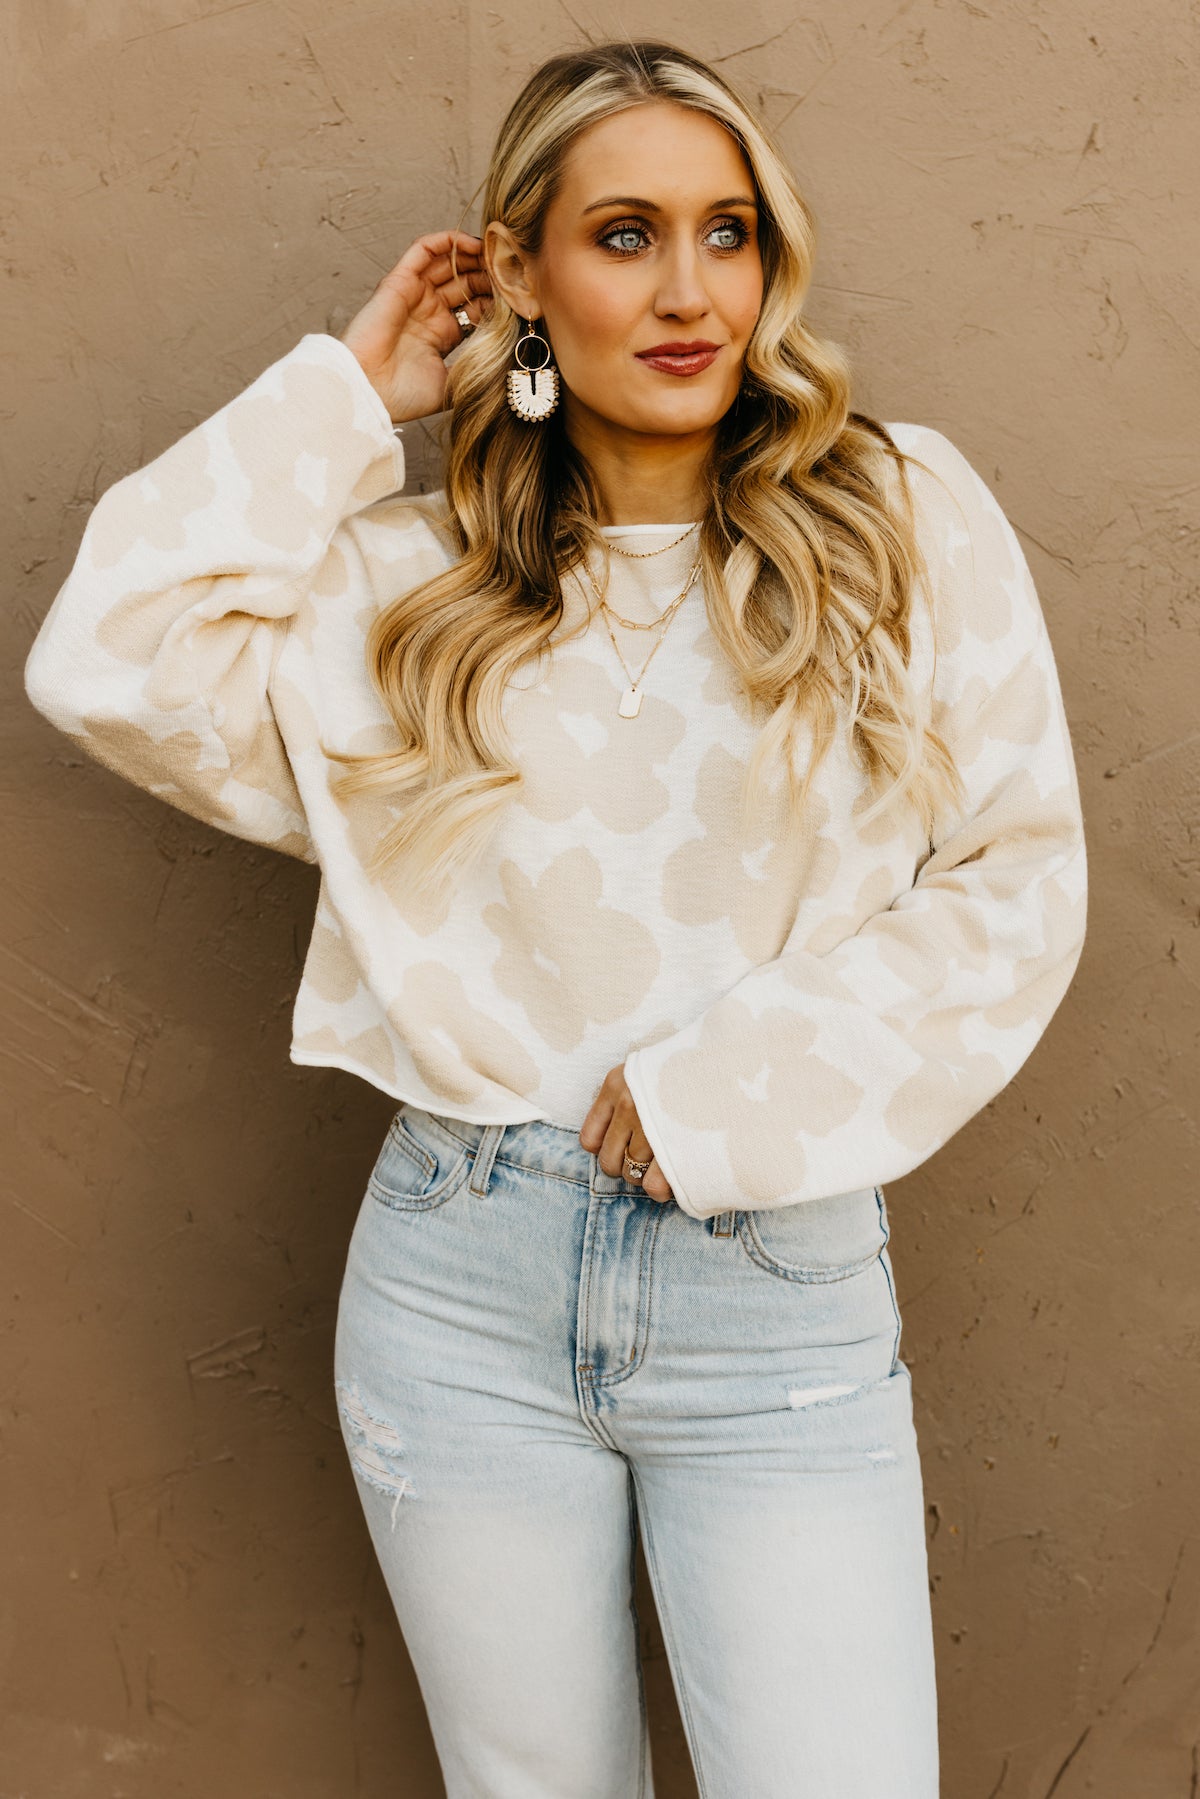 The Thomas Floral Cropped Sweater